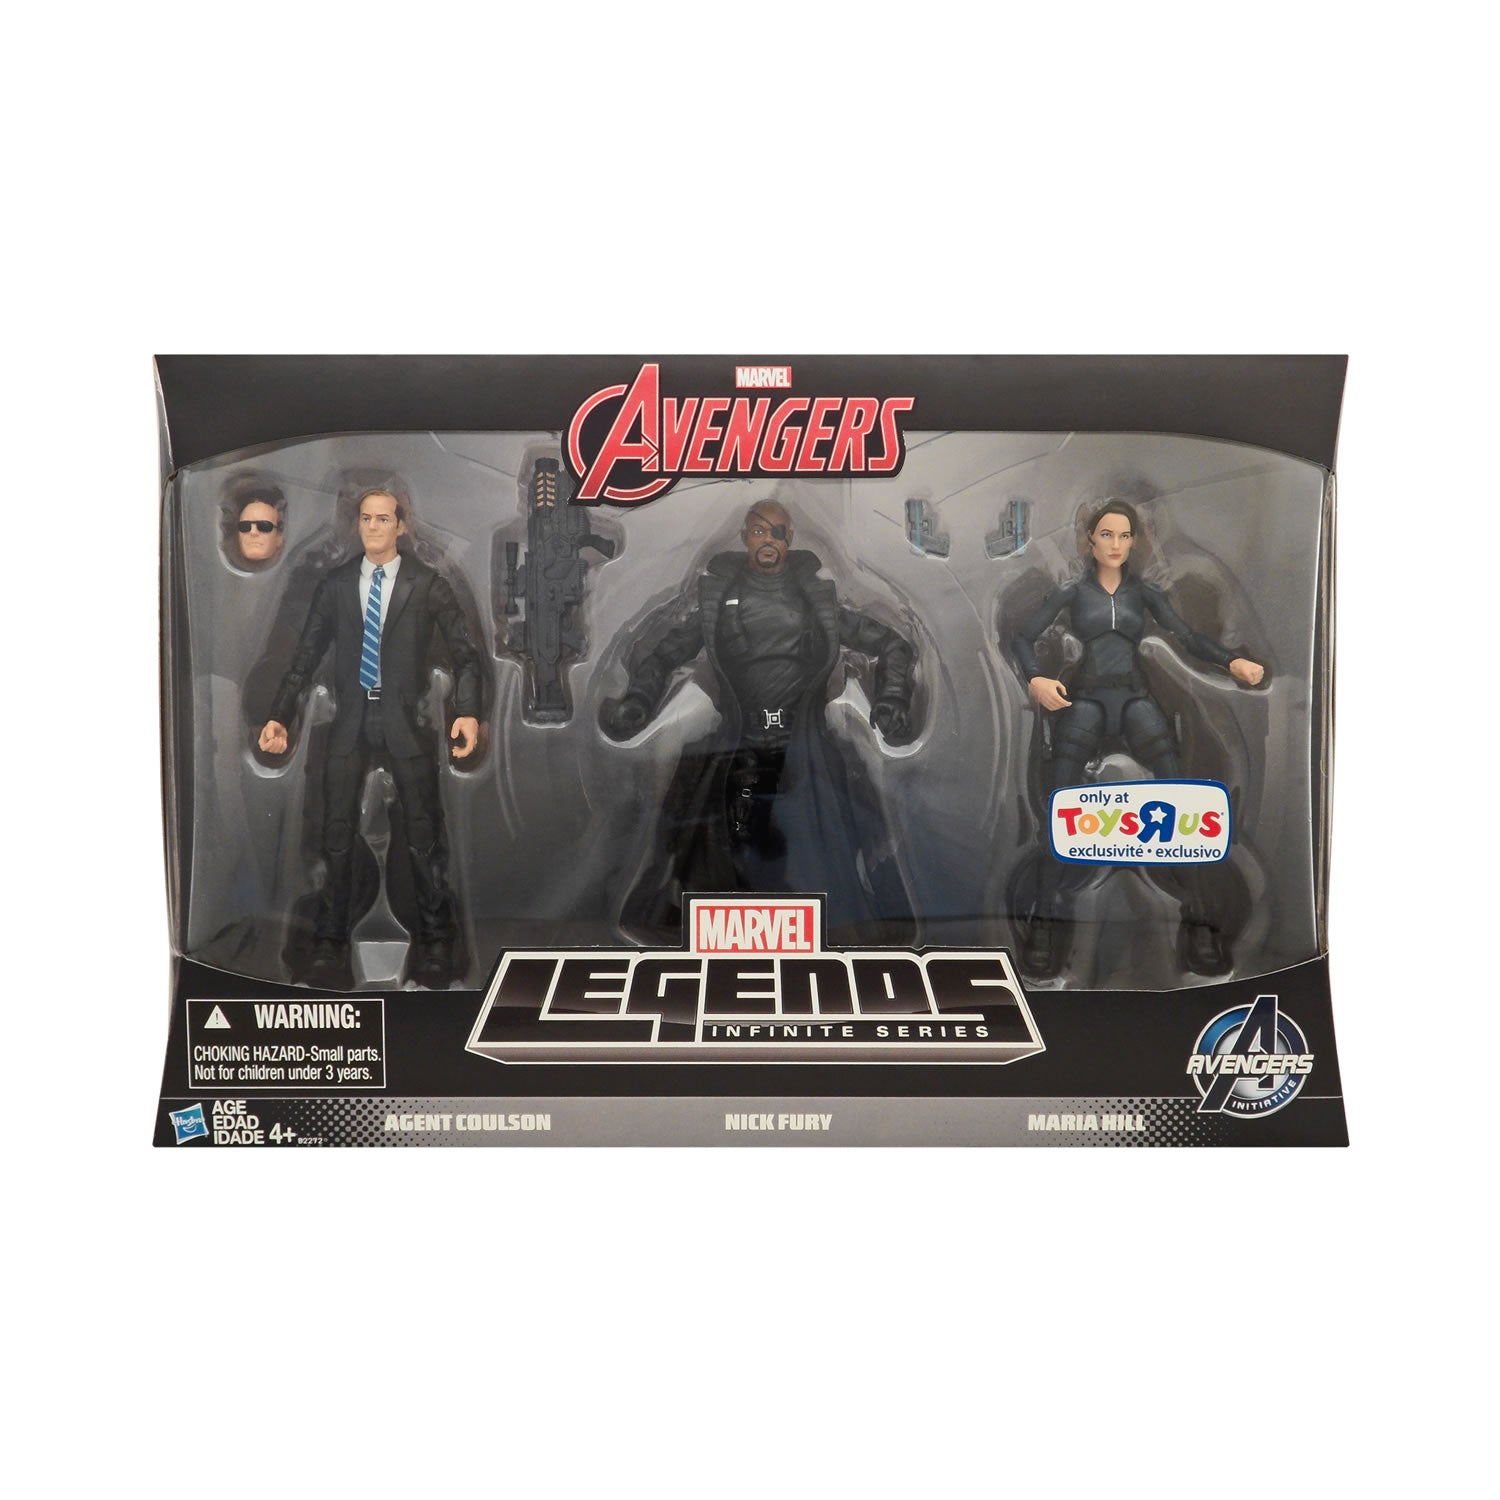 Every Marvel Legends Agent Phil Coulson Suits MOLD Comparison